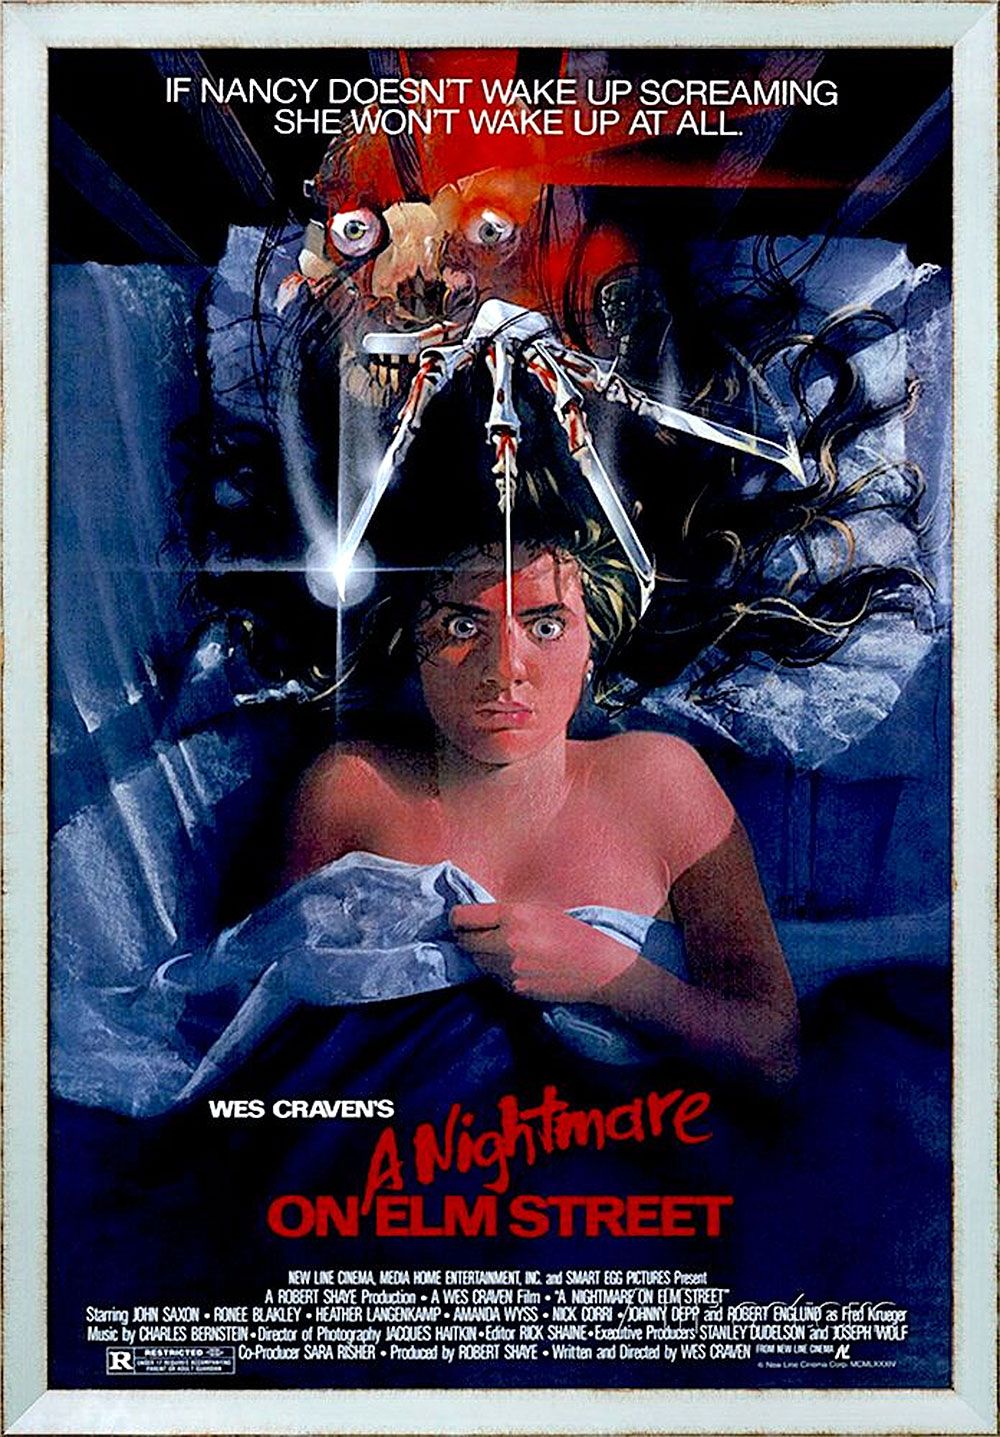 The original 1980s poster for A Nightmare On Elm Street